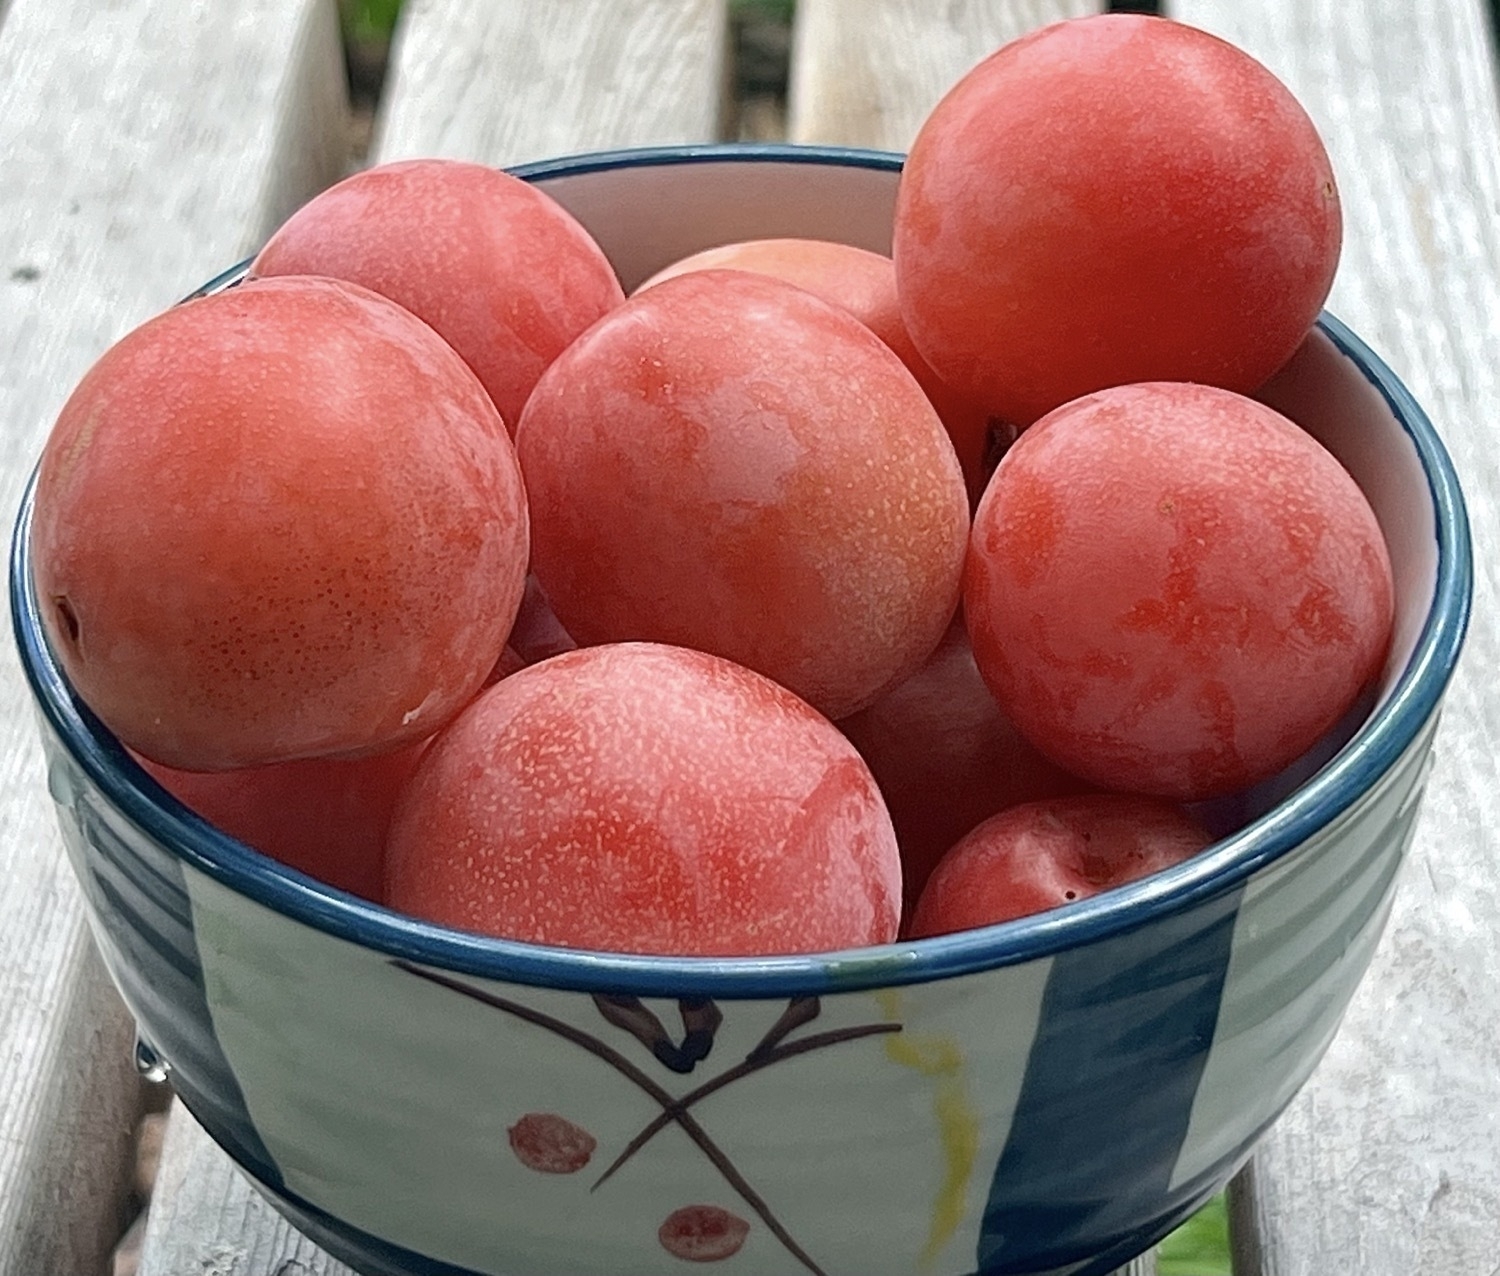 A bowl of small pink plums sit in a mostly white porcelain bowl